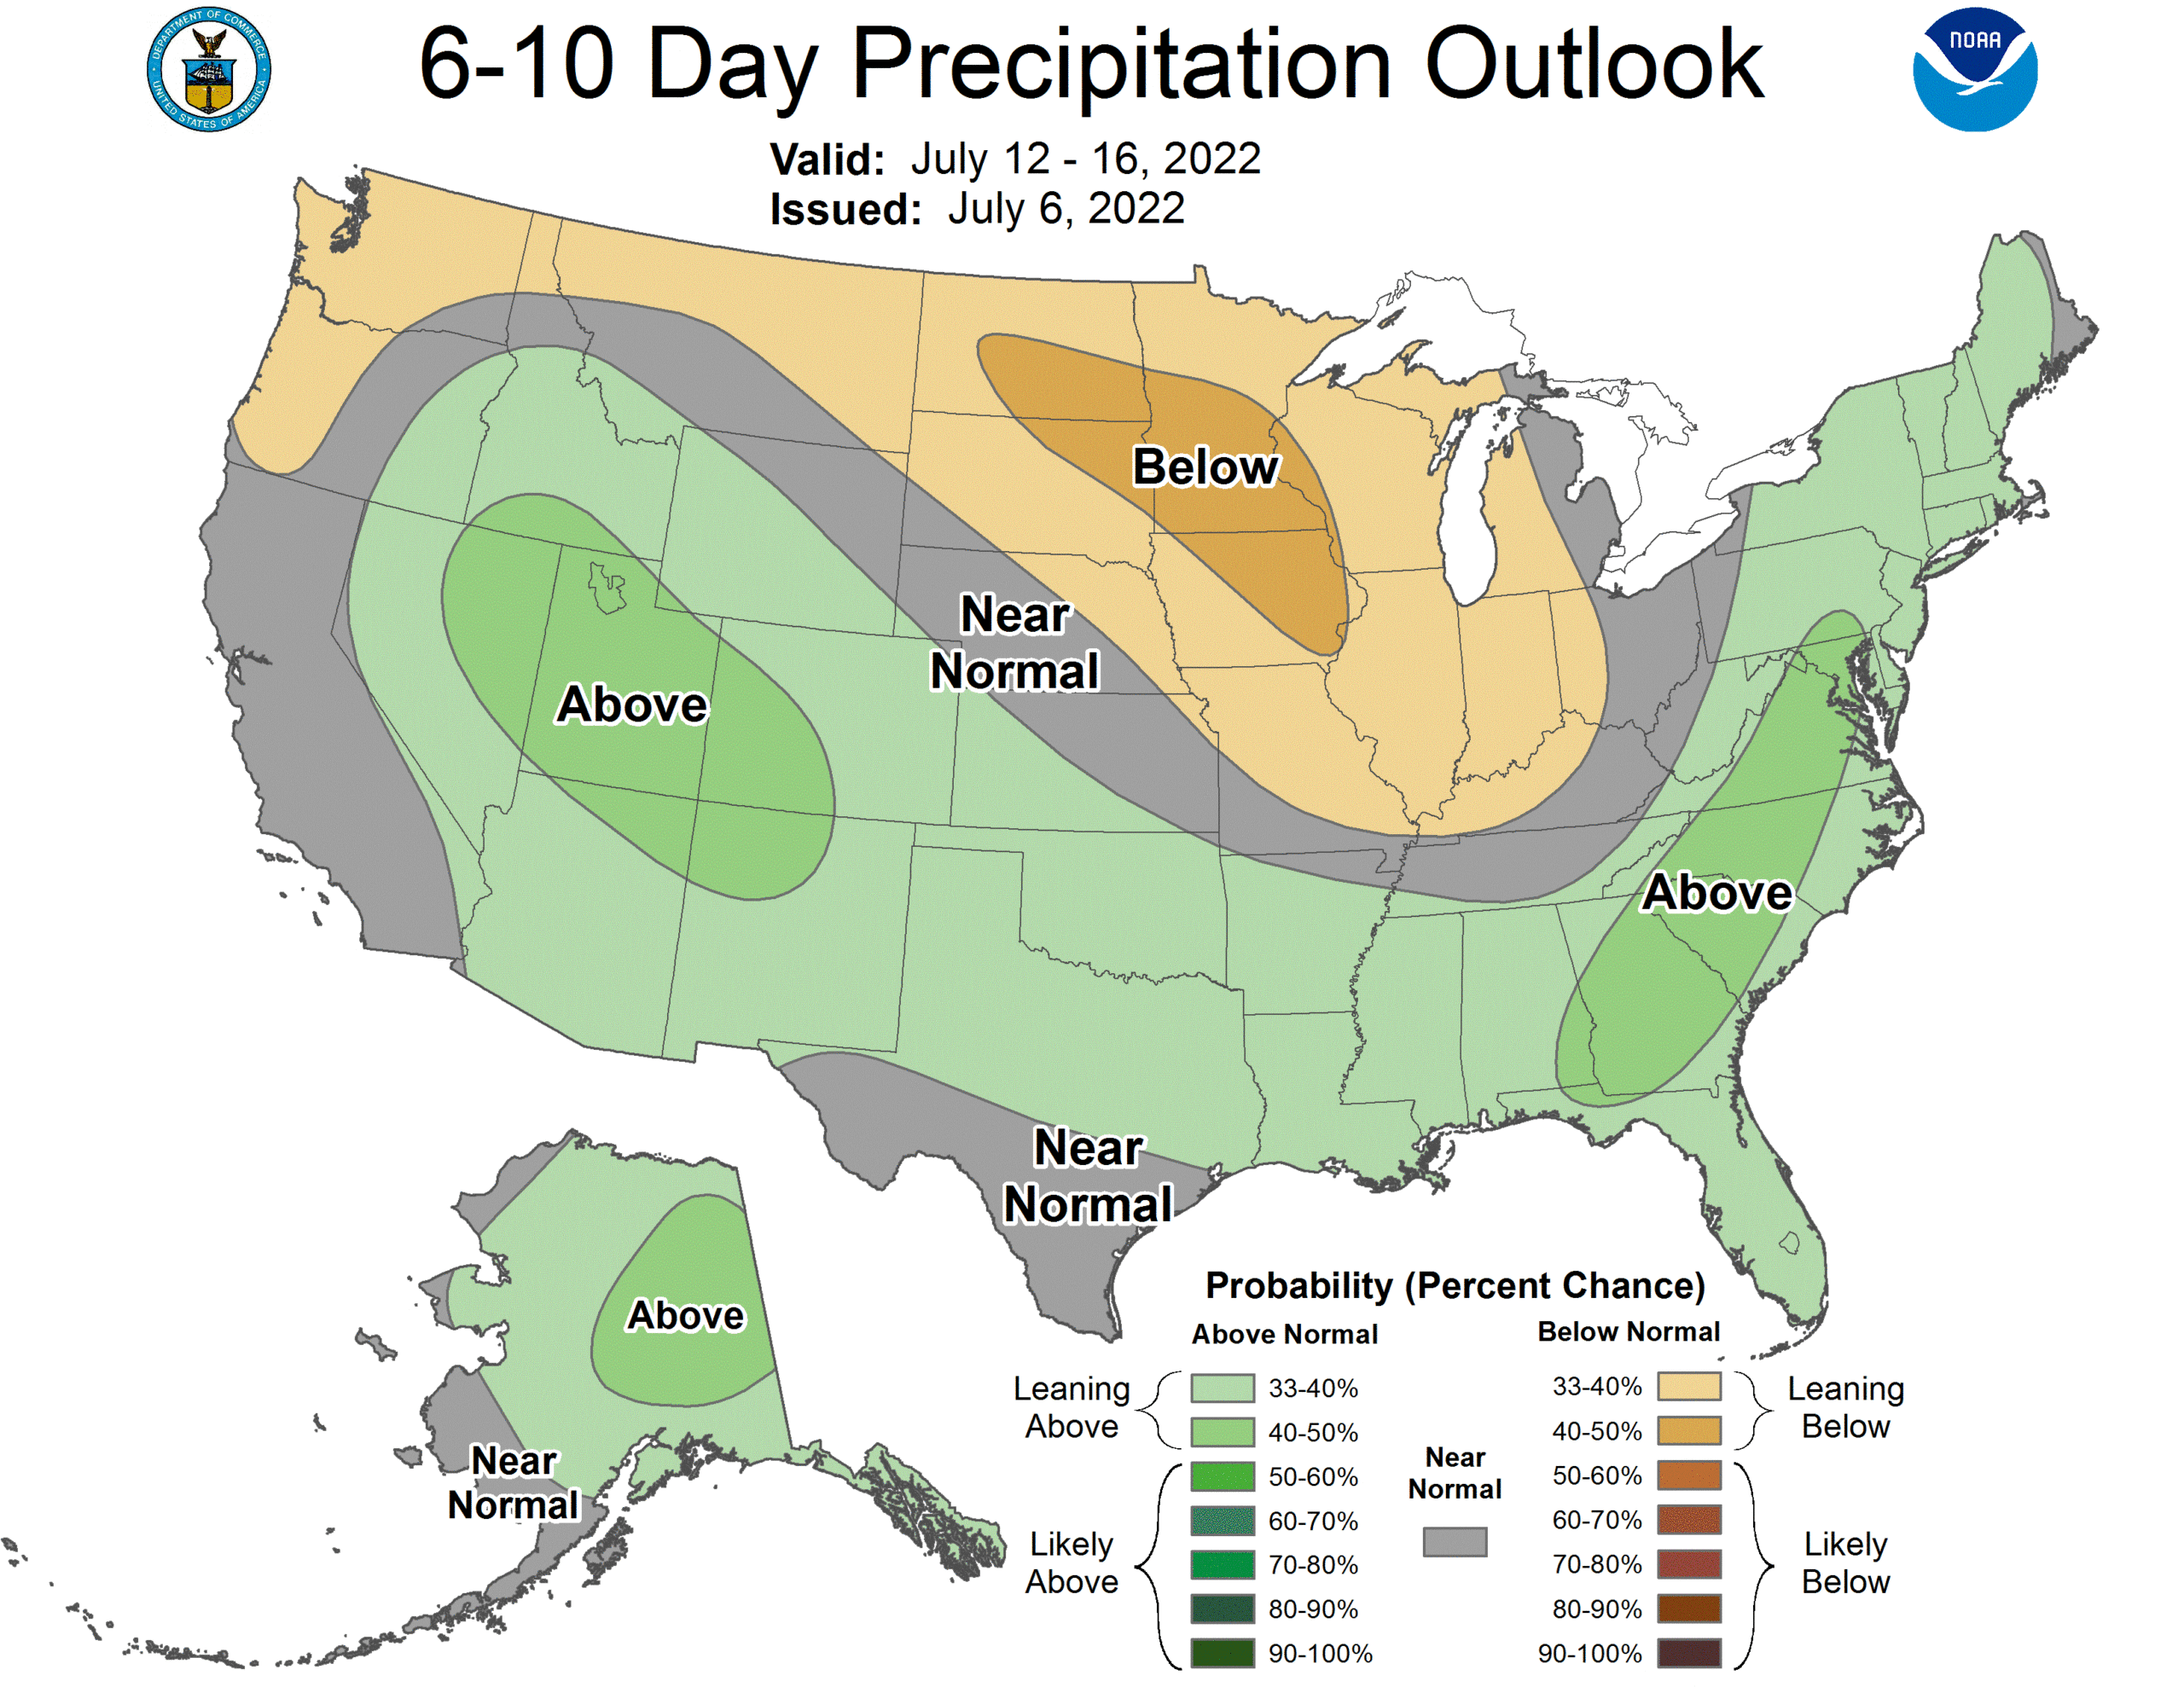 6 to 10 Day Outlook - Precipitation Probability